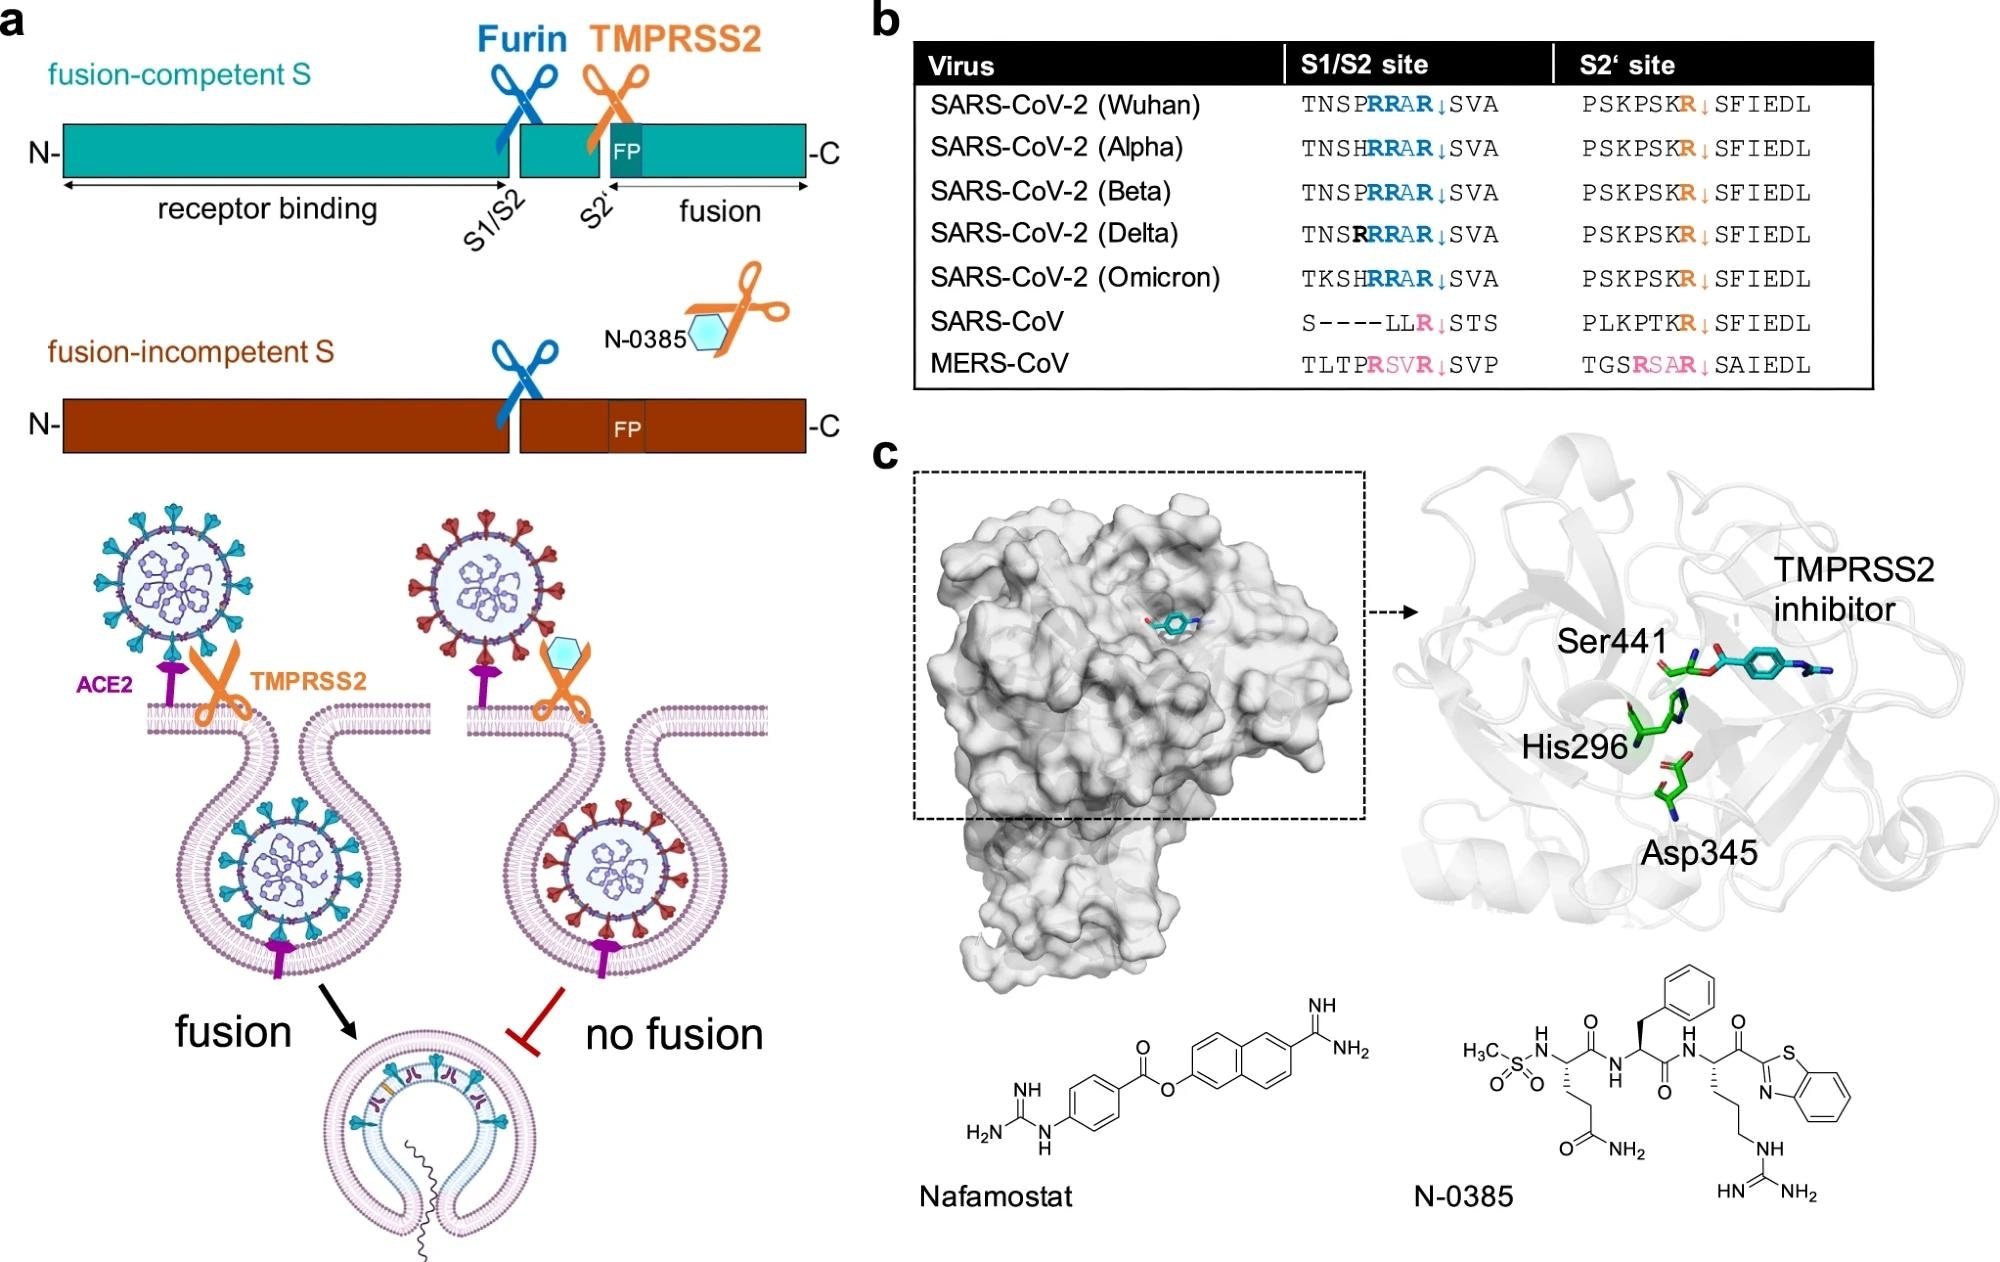 Inhibition of SARS-CoV-2 spike cleavage by TMPRSS2 inhibits virus entry.  a Upper panel: Schematic representation of SARS-CoV-2 S cleavage by furin at the S1/S2 site and subsequent cleavage at the S2' site by TMPRSS2.  Cleavage at the S2' site exposes the fusion peptide (FP), priming S for membrane fusion (S colored cyan).  Inhibition of TMPRSS2 by N-0385 (blue hexagon) causes incomplete S cleavage (red colored S).  Bottom panel: Complete S cleavage supports membrane fusion and release of the viral genome into the target cell.  Inhibition of TMPRSS2 results in incomplete S cleavage and thus prevents virus fusion and entry.  b Alignment of amino acid sequences at the S1/S2 and S2' sites of different SARS-CoV-2, zoonotic SARS-CoV and MERS-CoV variants of concern.  Amino acid motifs highlighted in blue and orange are cleaved by furin and TMPRSS2, respectively.  The motifs highlighted in pink are most likely cleaved by TMPRSS2.  c Crystal structure of human TMPRSS2 (SRCR and serine protease domain) in complex with nafamostat (cyan, PDB: 7MEQ; upper left panel).  Catalytic domain (cartoon style) of TMPRSS2 (upper right panel).  The catalytic triad (green stick model) and nafamostat (cyan) are shown.  Structures of nafamostat (PubChem CID 4413) and N-0385 (PubChem CID 135169285, lower panels)